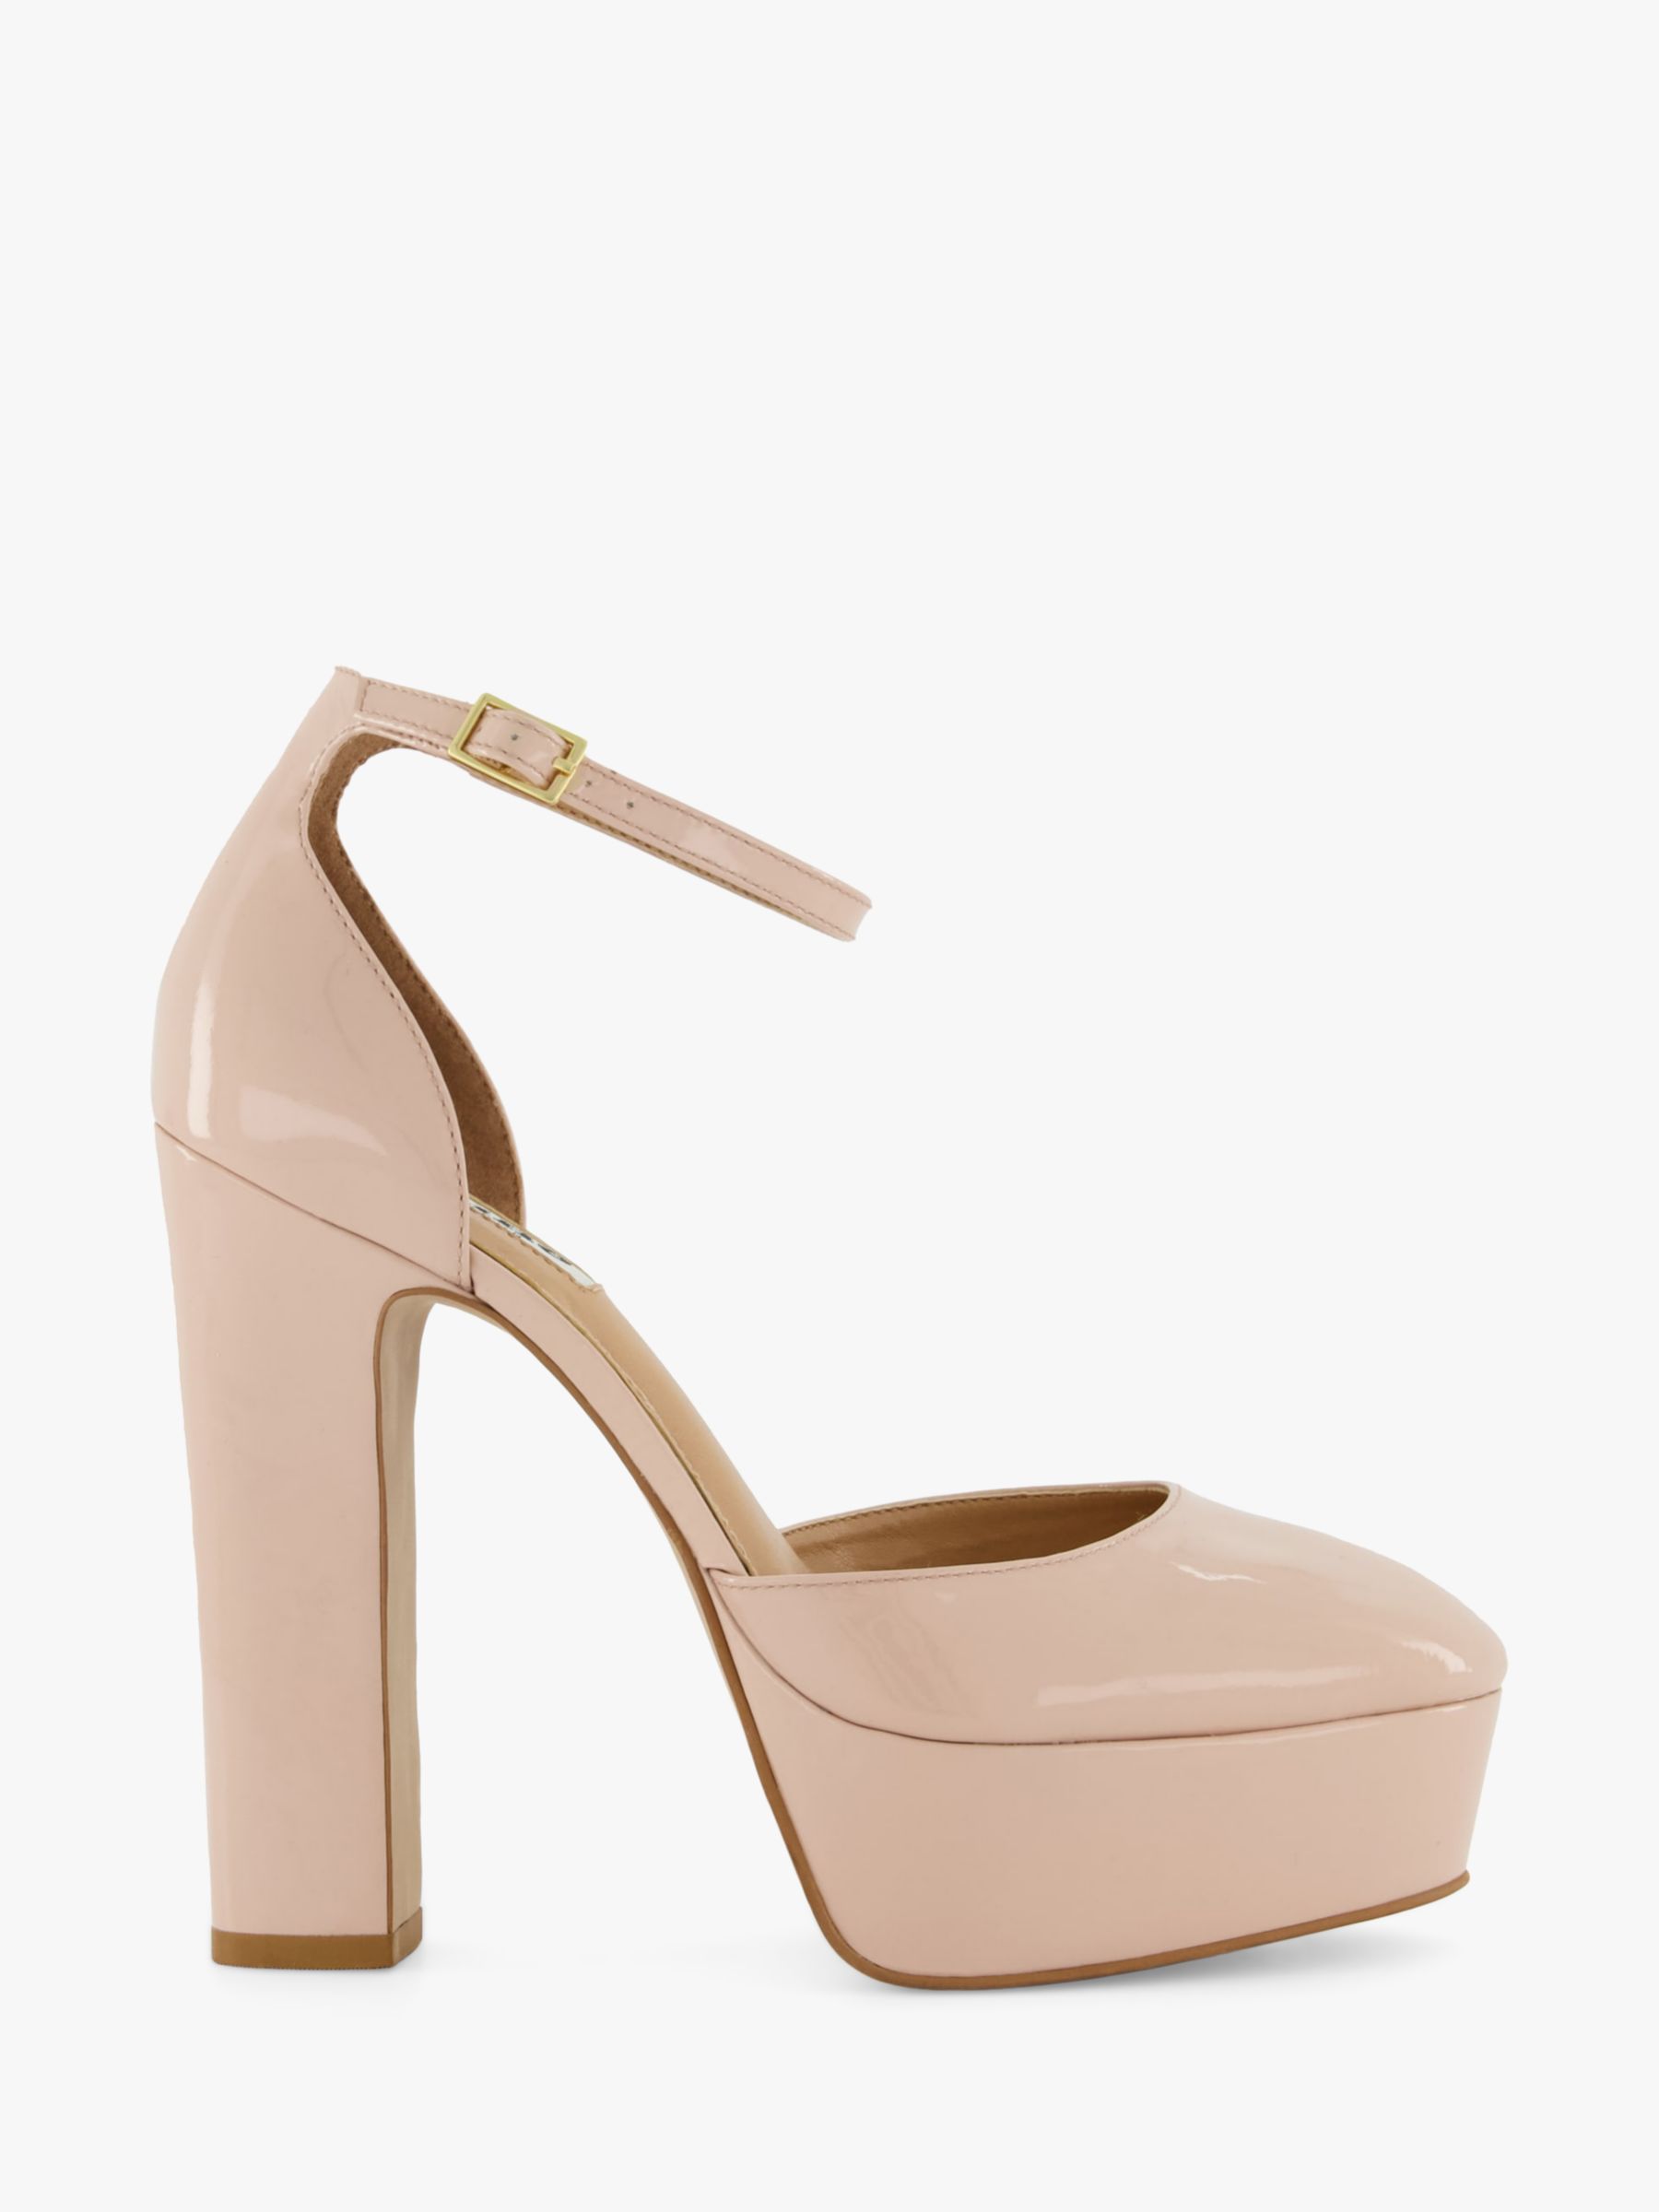 Dune Contest Leather Platform Mary Jane Court Shoes, Nude at John Lewis ...